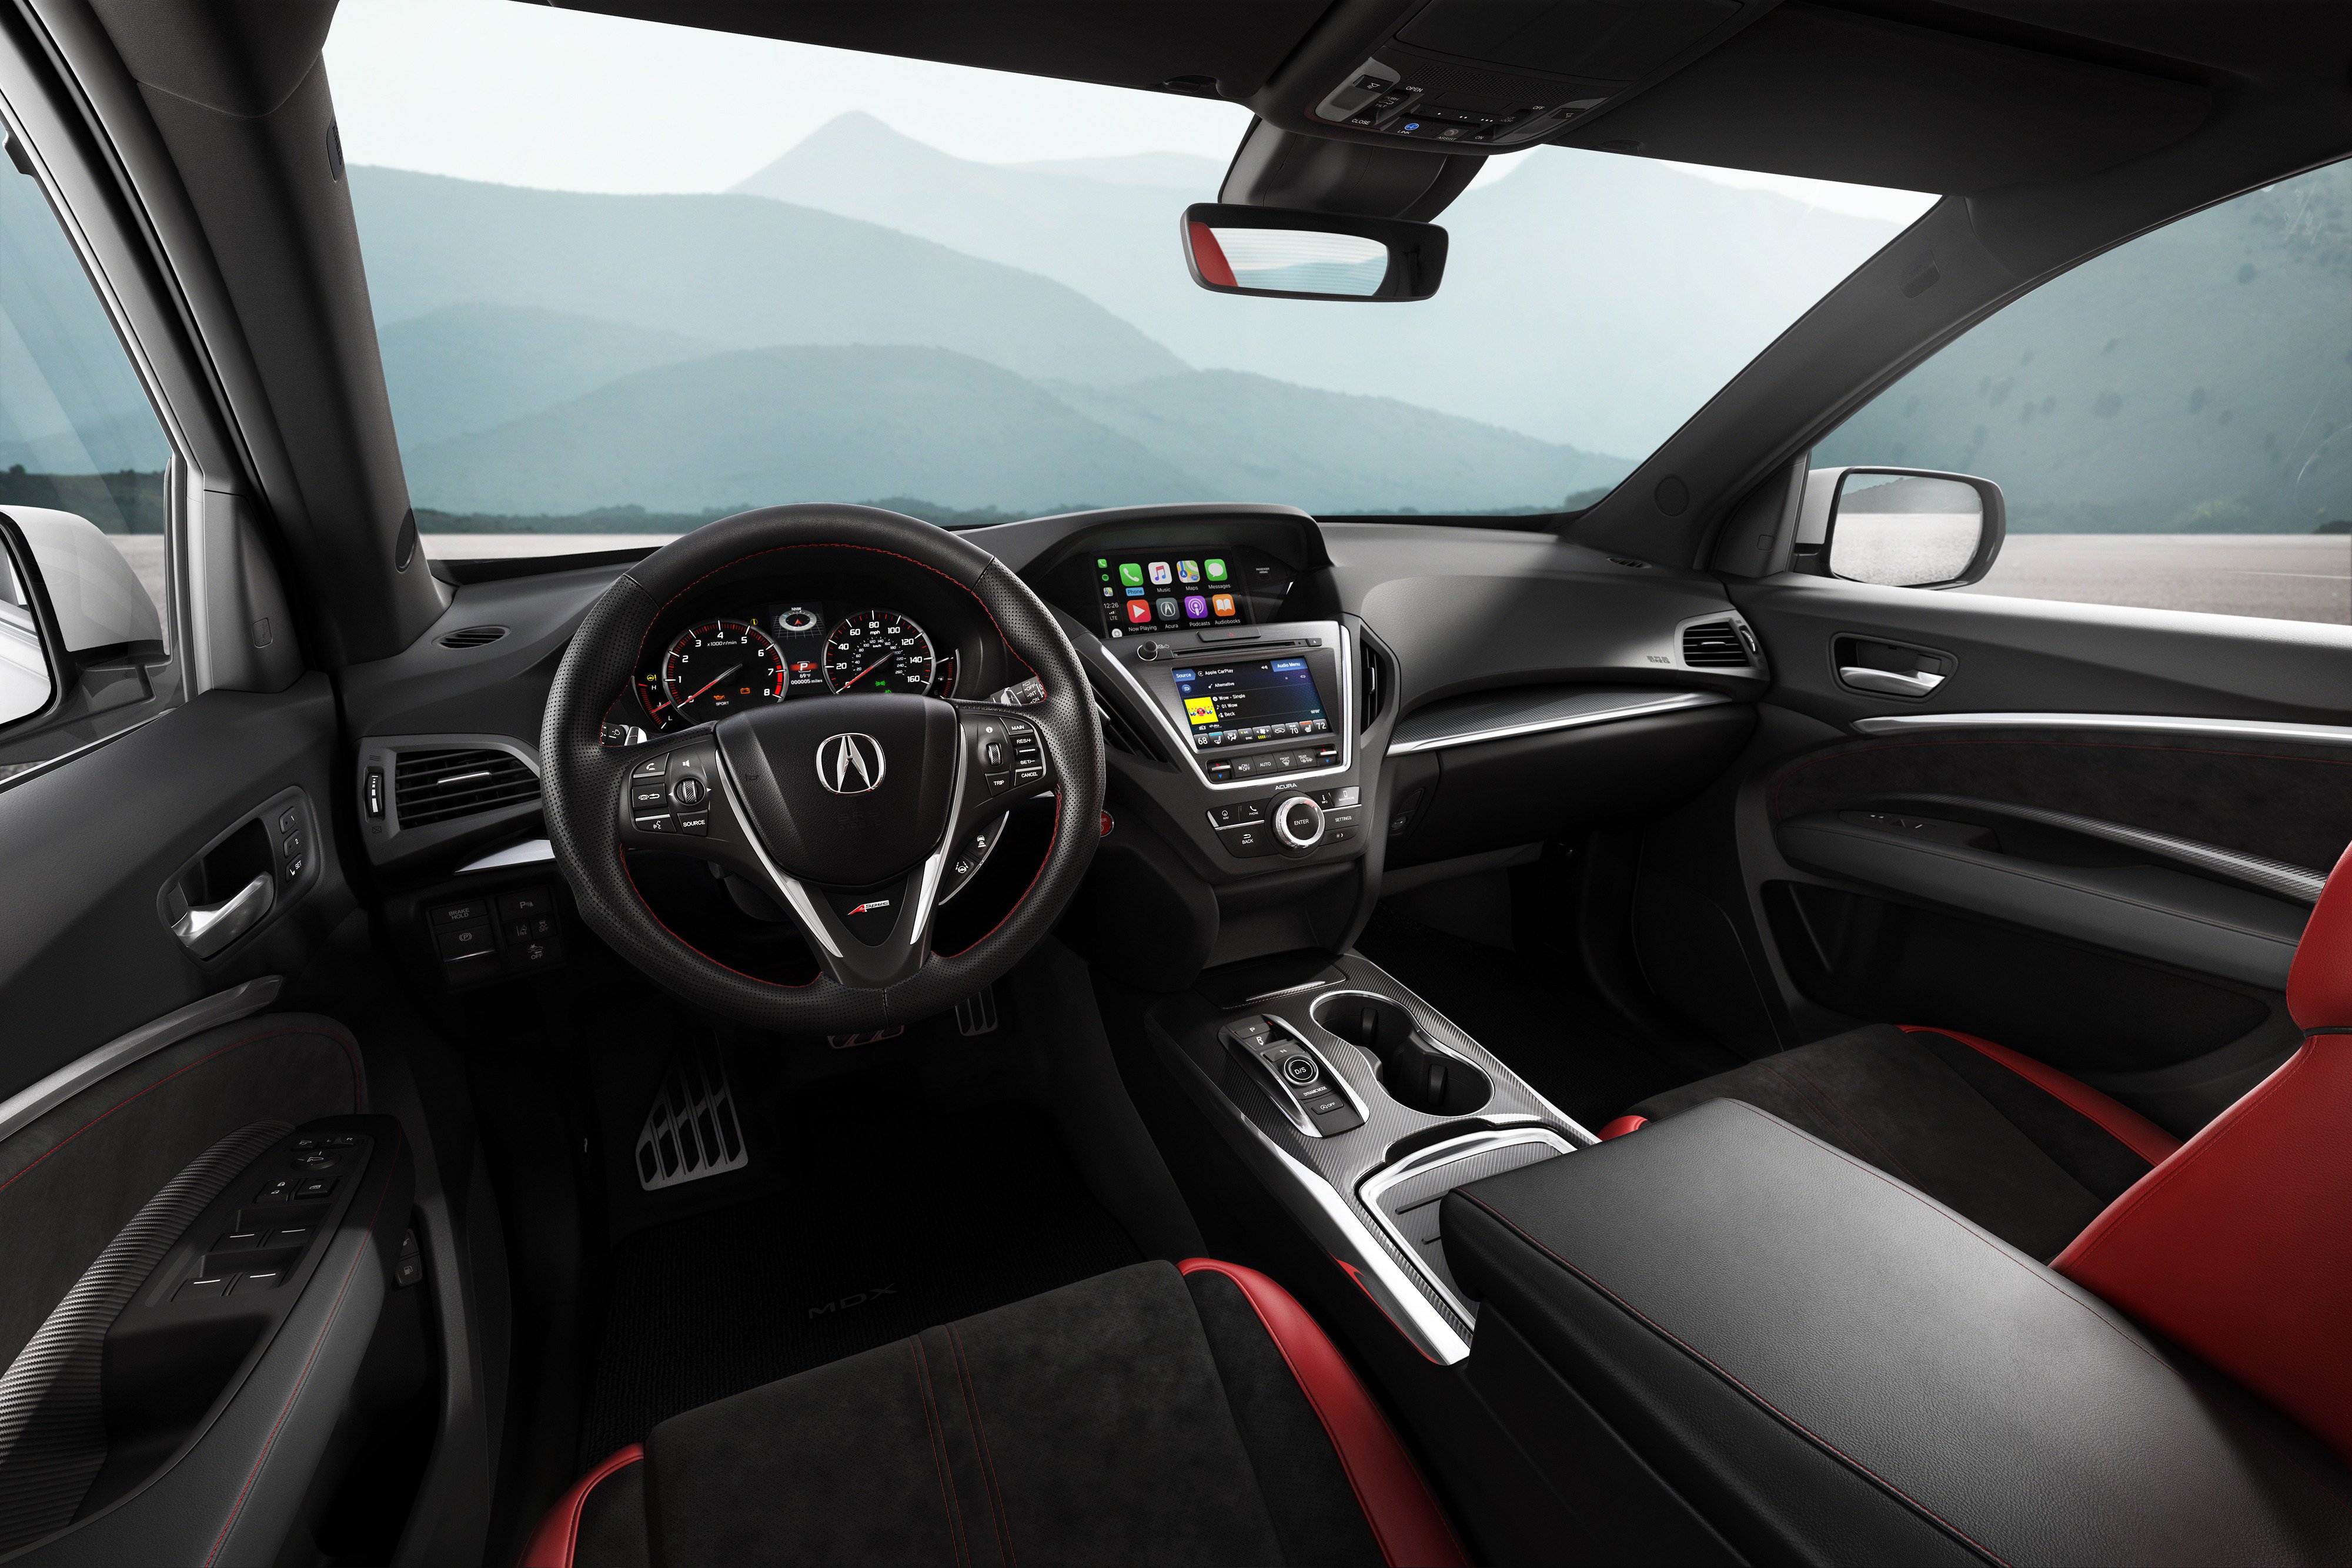 Acura on Twitter: "Coming this summer, the #MDX receives an A-Spec trim  featuring sport seats trimmed in rich red or black leather with black  Alcantara© inserts, high-contrast stitching, sport pedals and interior